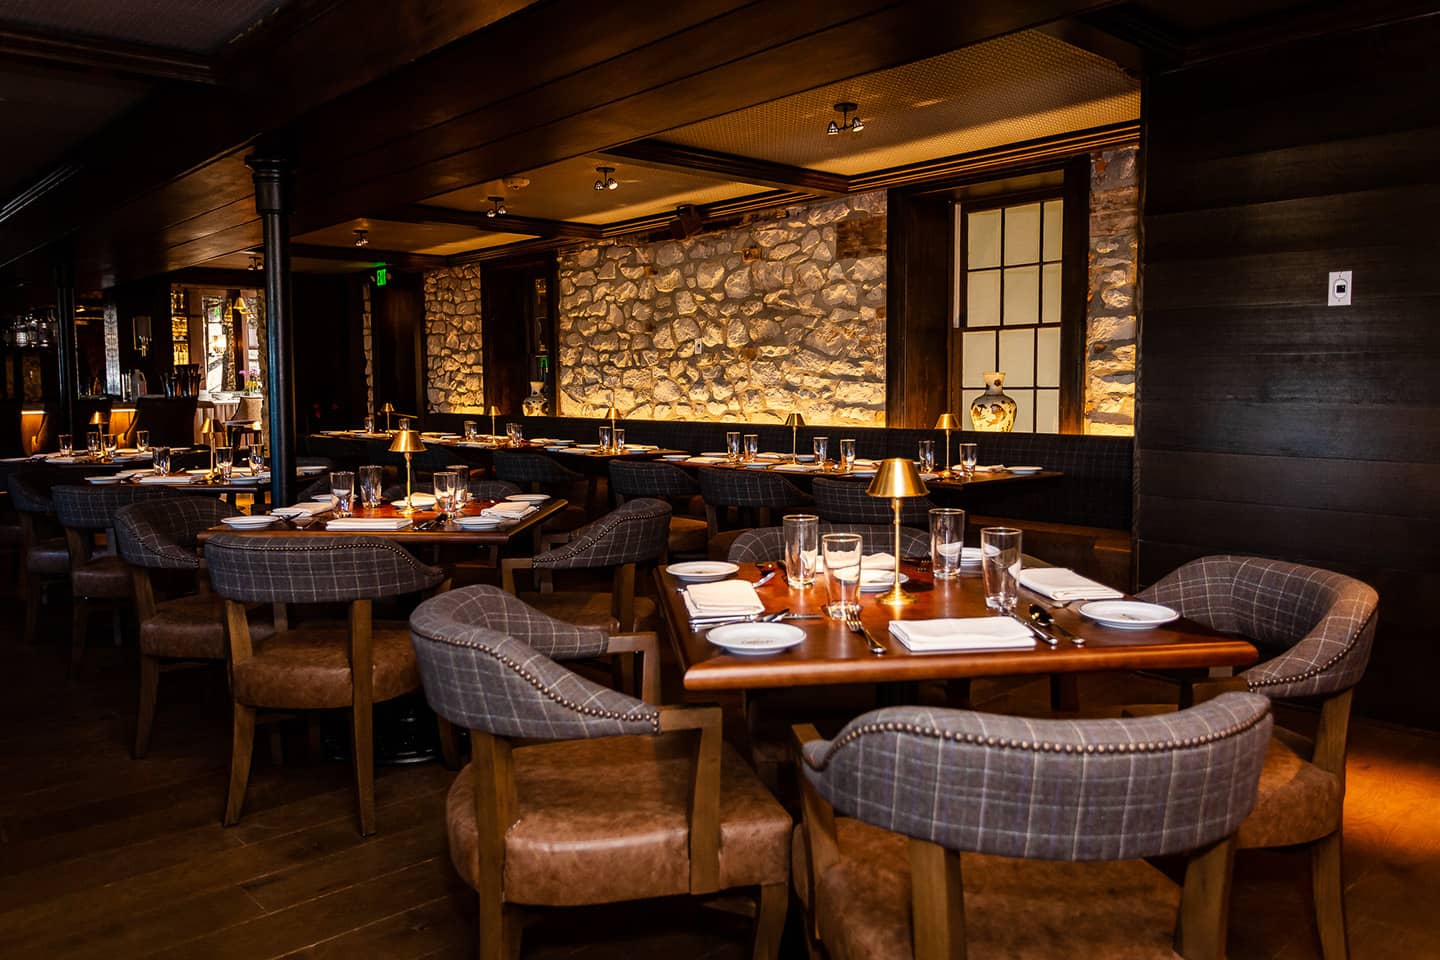 Elegantly set tables in a dimly lit upscale restaurant with stone wall accents.